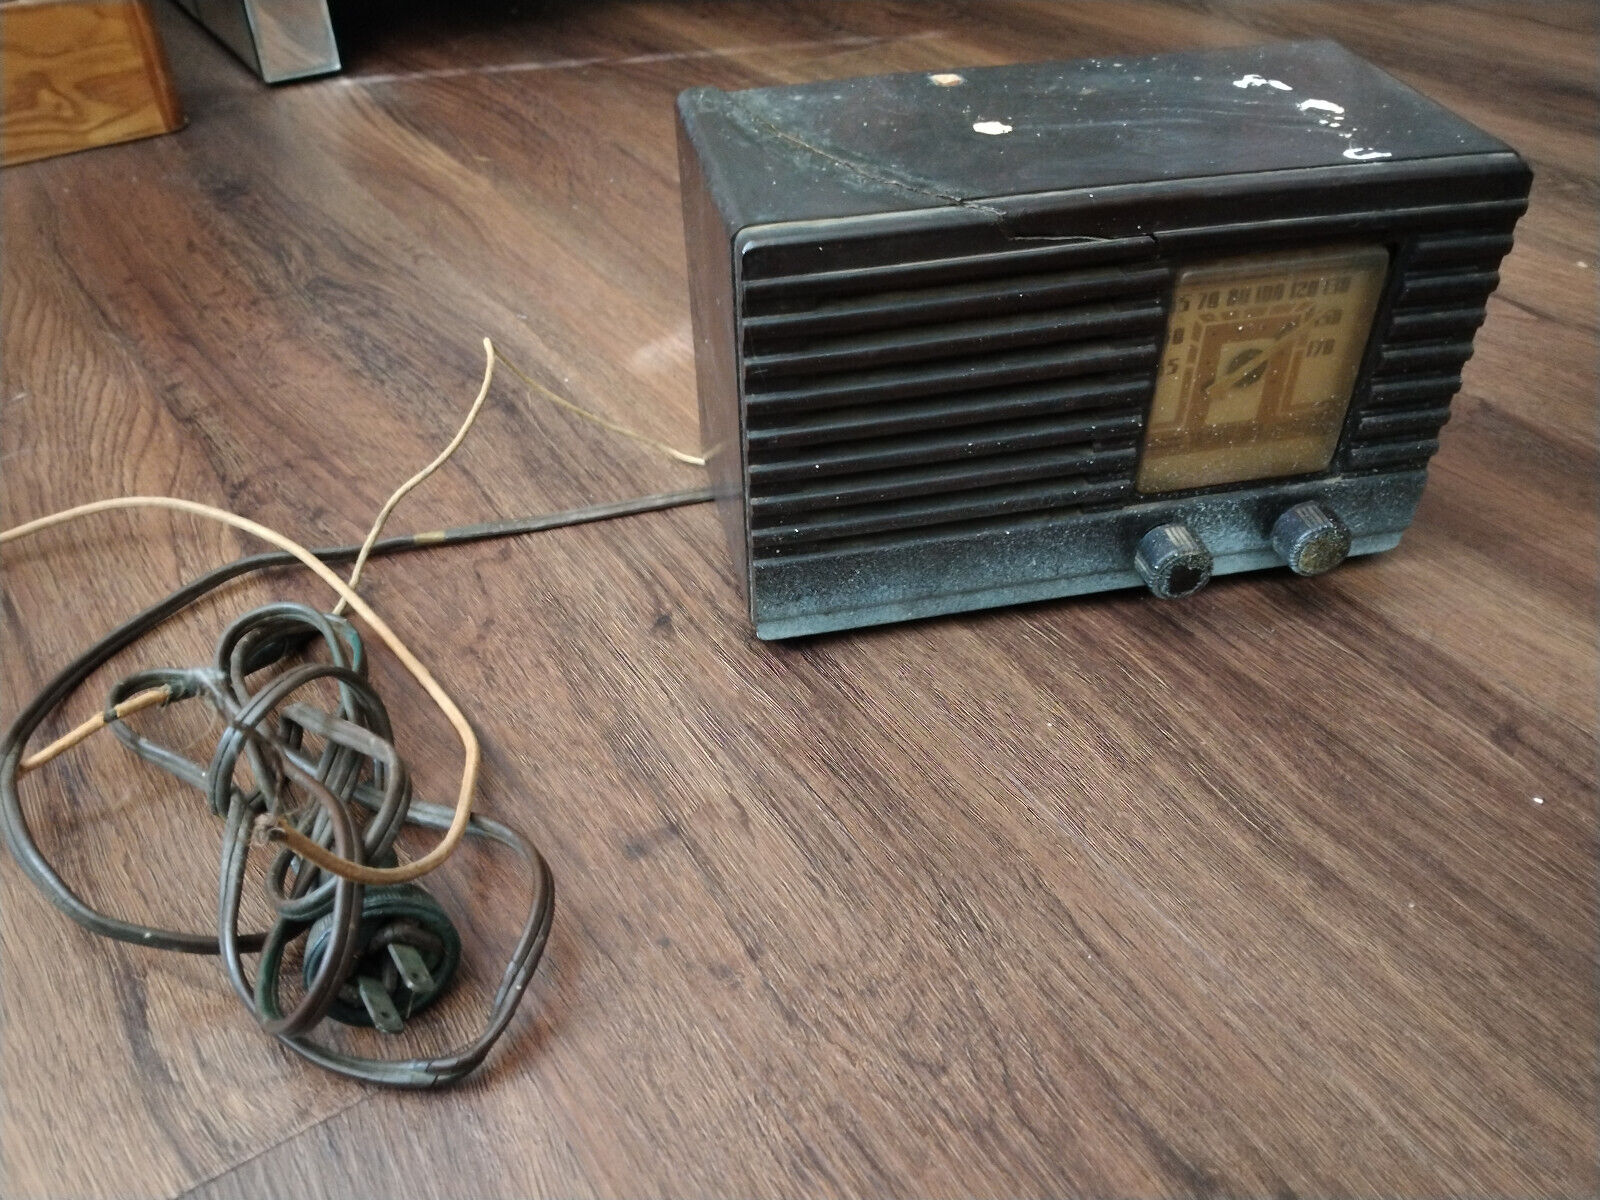 Philco TH-4 Transitone Tube Radio 1939 DAMAGED AS IS SEE PICTURES